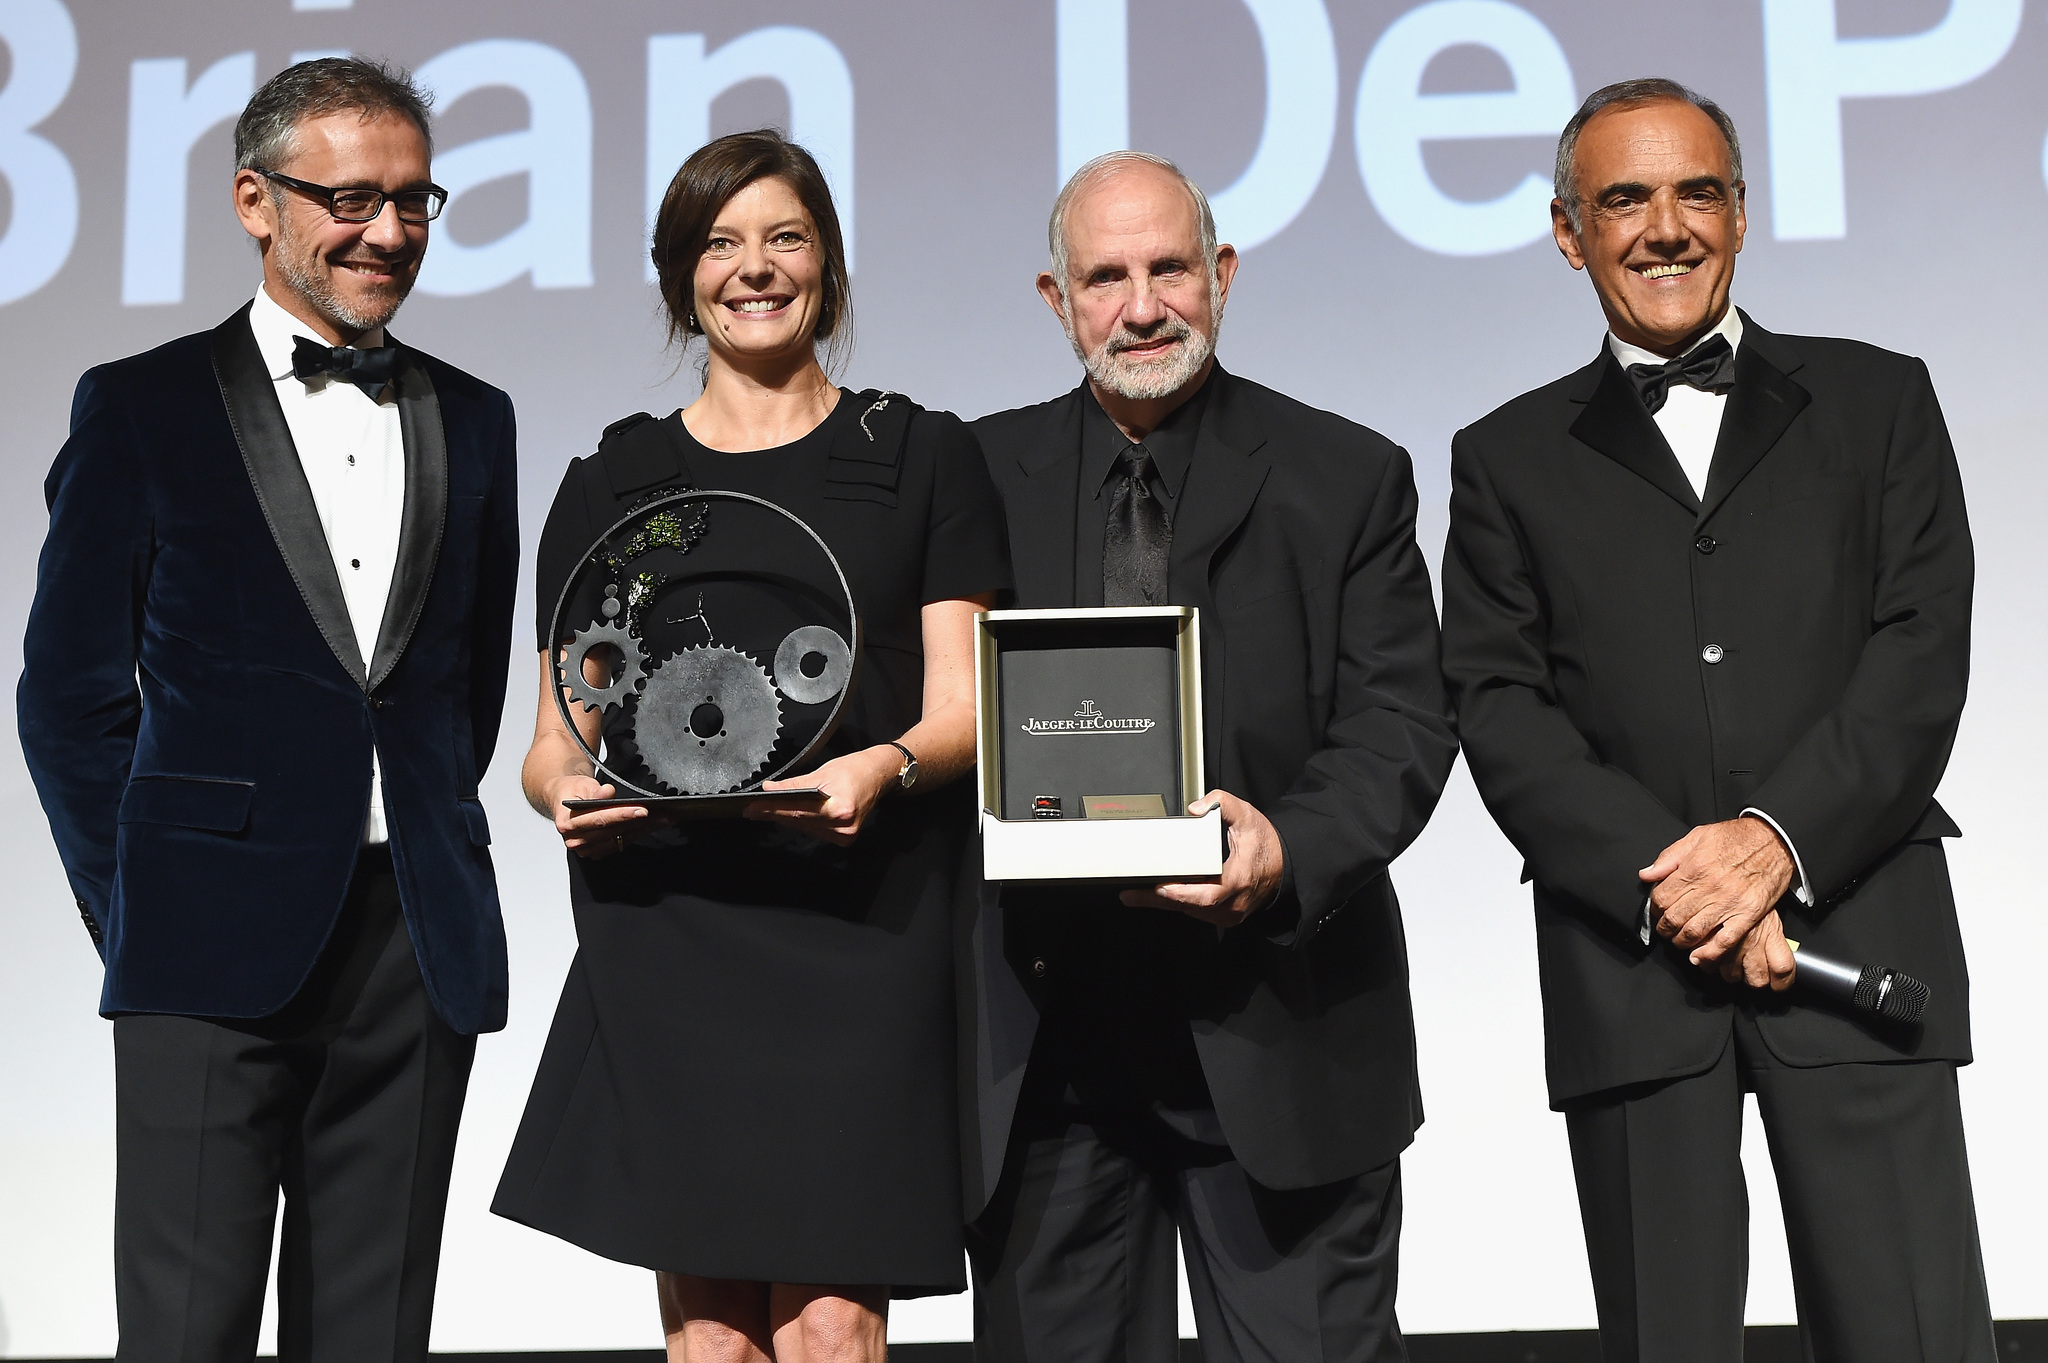 Chiara Mastroianni and Brian De Palma on stage with their awards with Laurent Vinay and Venice Film Festival director Alberto Barbera at the Jaeger-LeCoultre Glory to the Filmmaker 2015 Award Ceremony.